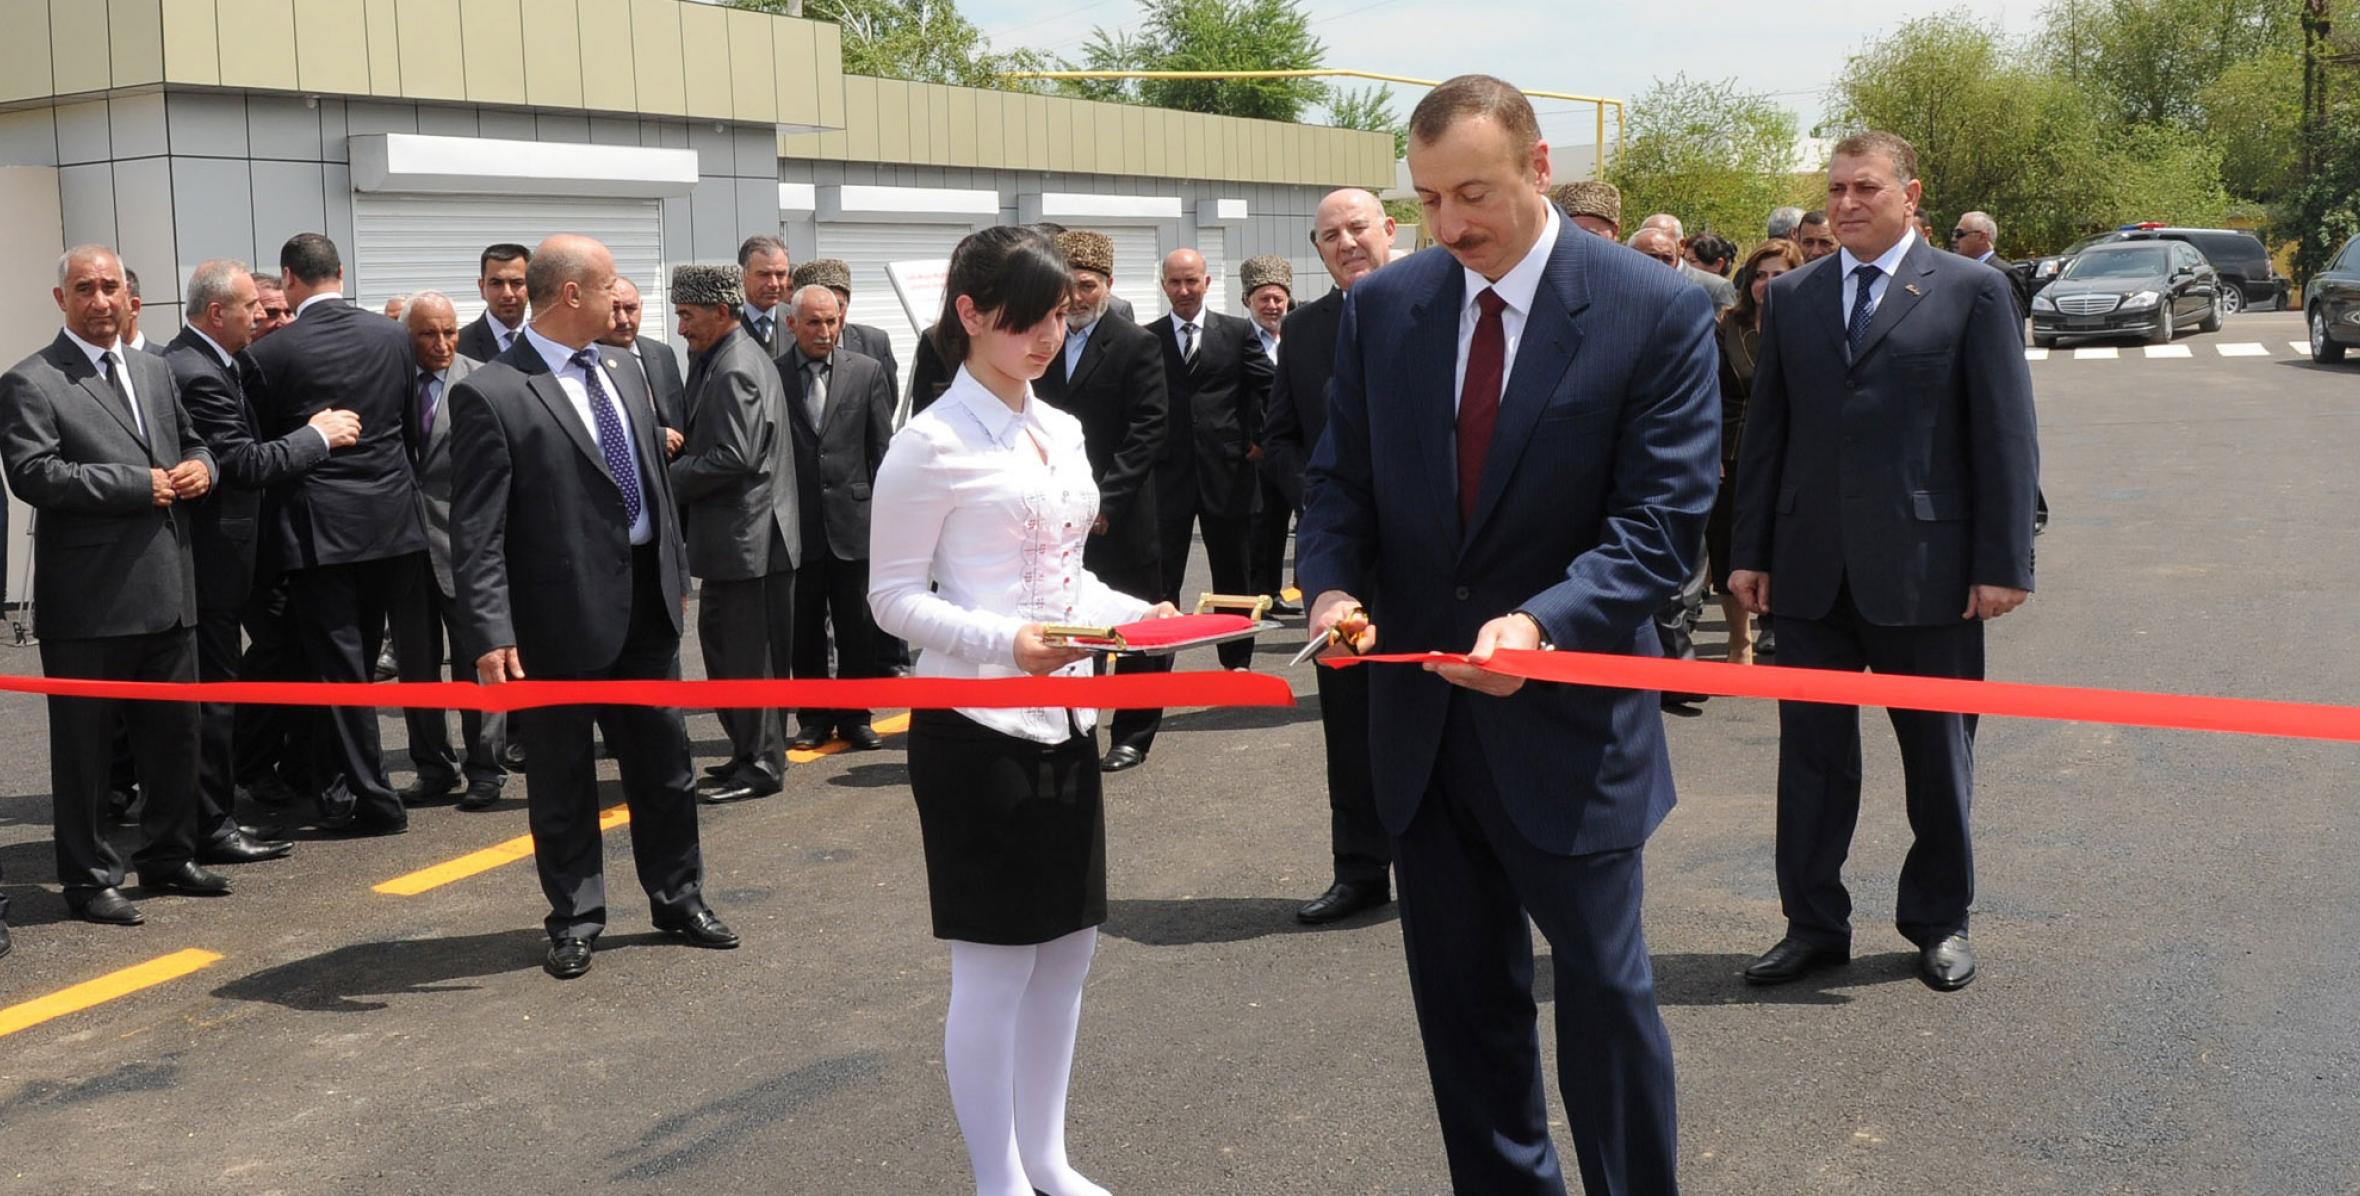 Ilham Aliyev participated at the opening of Saatly-Musaly-Mazrali road after its reconstruction